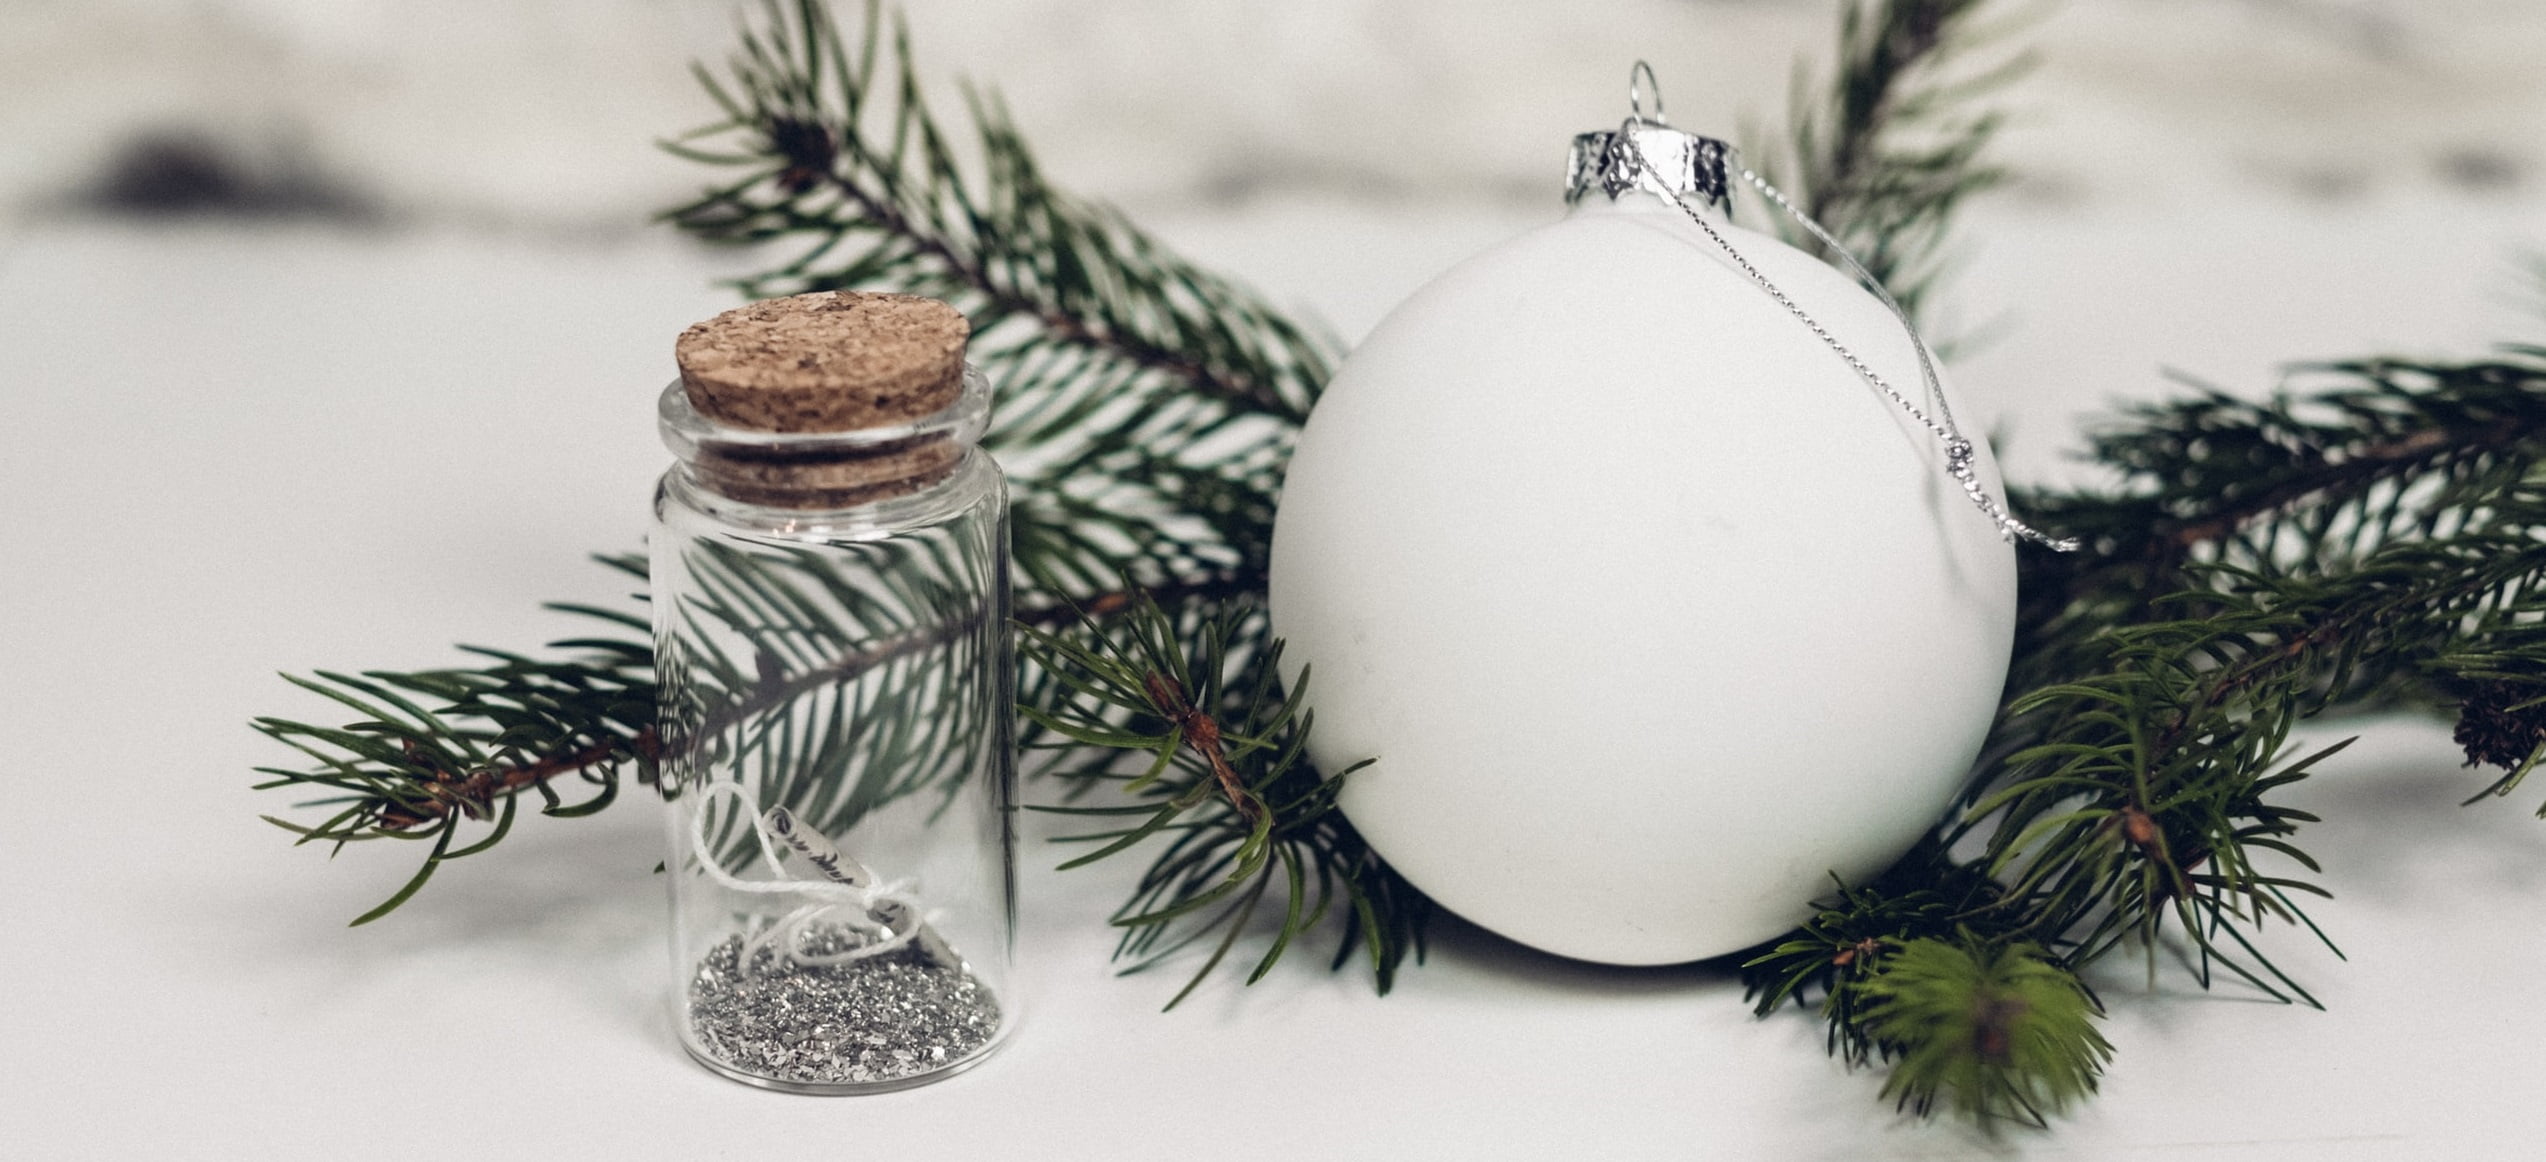 Best Christmas Glass Ornaments